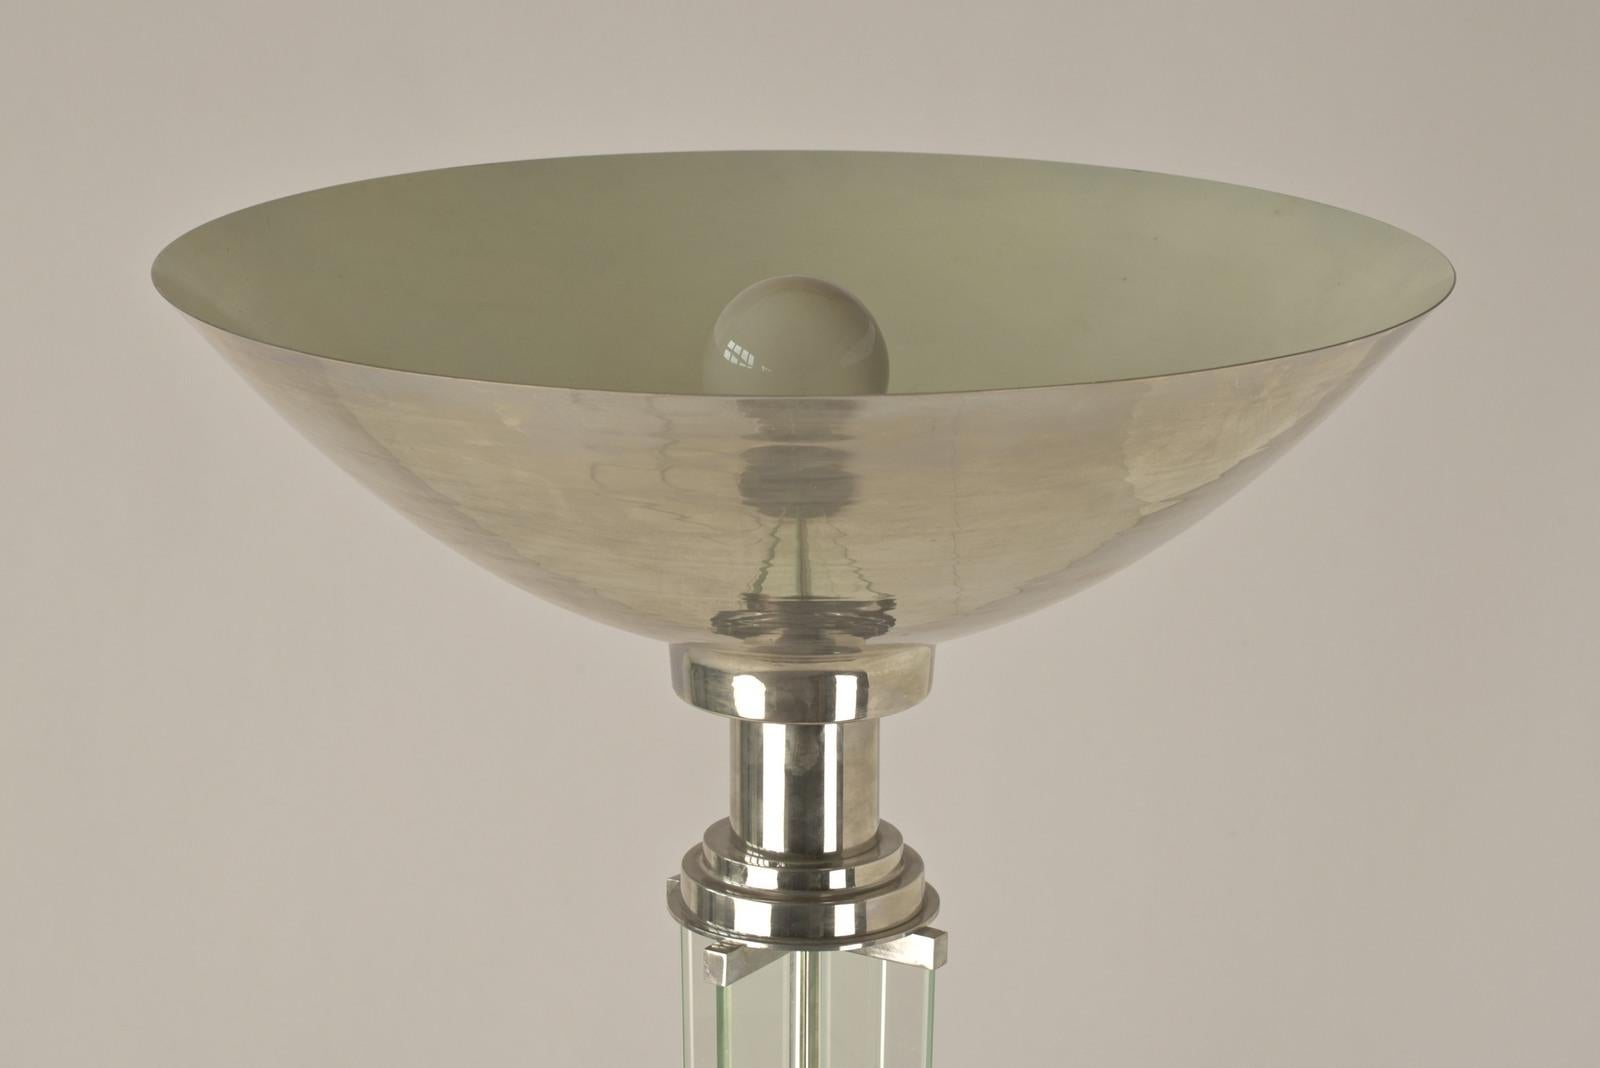 Art Deco Metal and Glass Floor Lamp, France - 1940s  For Sale 5